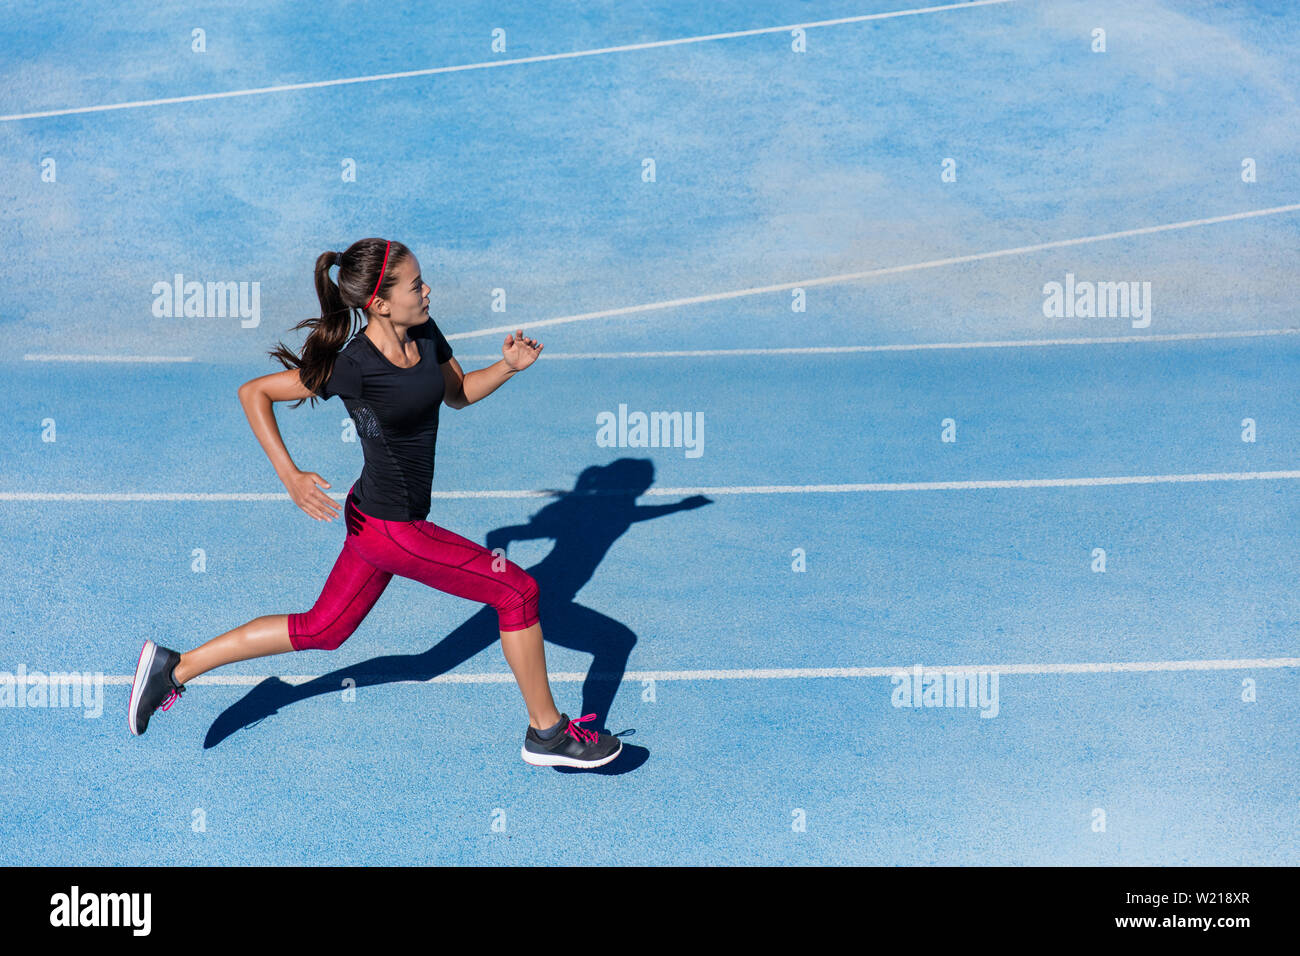 Athlete runner running on athletic track training her cardio. Jogger woman jogging at fast pace for competition race on blue lane at summer outdoor stadium wearing red capri tights and sports shoes. Stock Photo